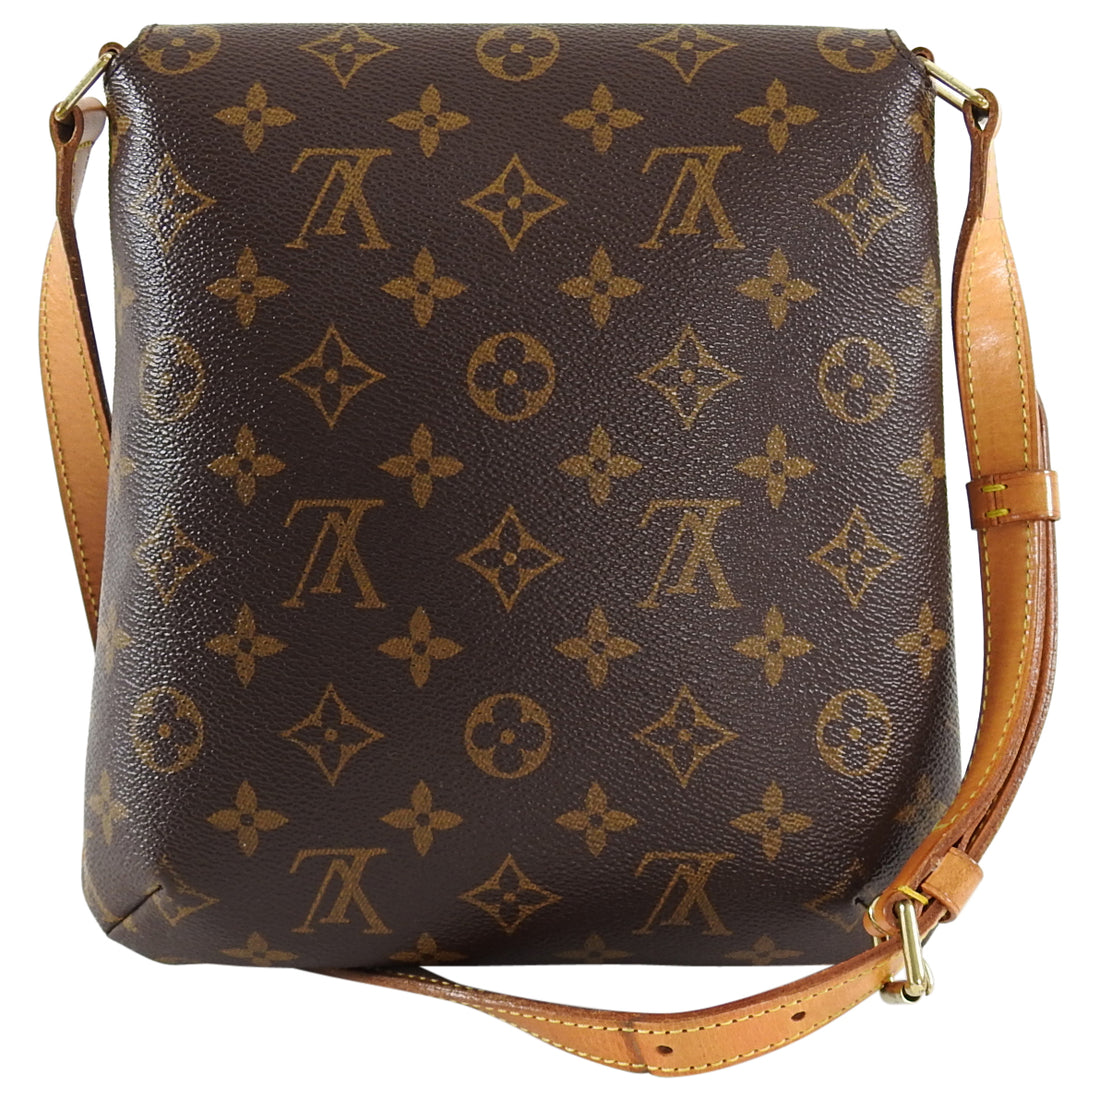 I miss you vintage - Louis Vuitton monogram musette salsa PM bag  #louisvuittonbags . . Available in store or purchase online with free ship  in Canada for orders $150+. Find additional photos